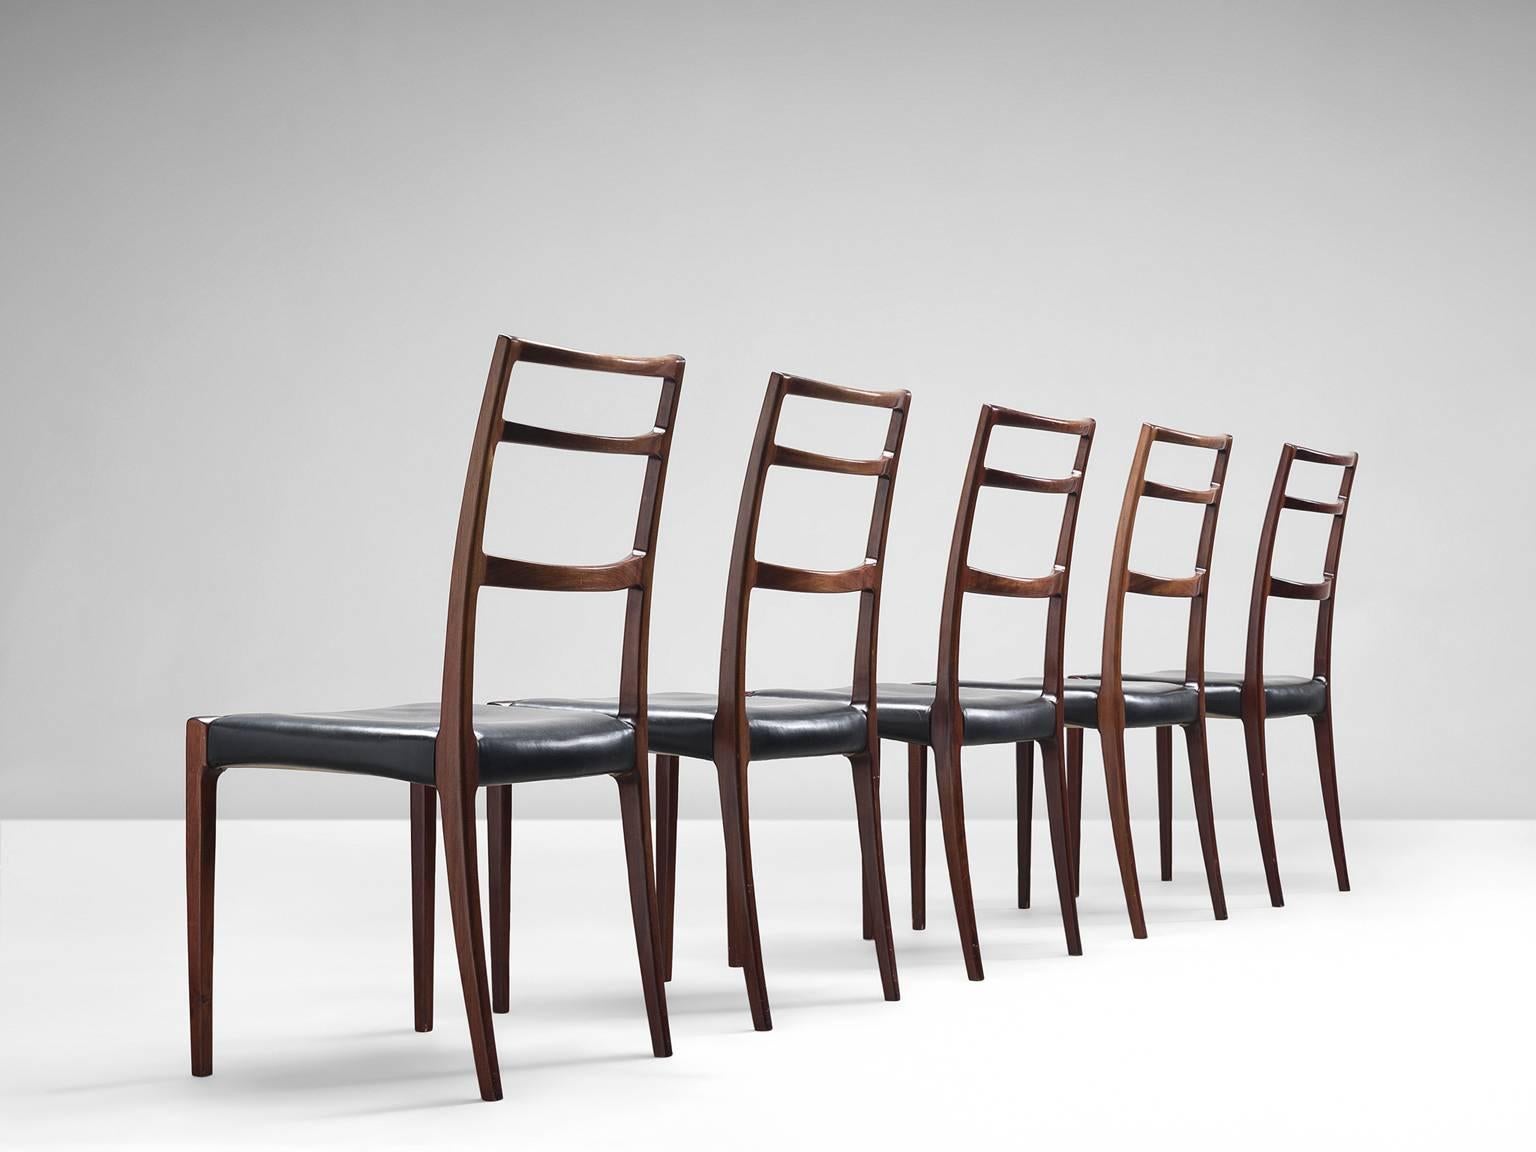 Gunni Omann for Omann Jun, dining chairs, leather, mahogany, Denmark, 1960s-1970s.

This set of five elegant dining chairs features a delicate, well-executed frame. The back is slightly curved and tilted and the open back is supported by three